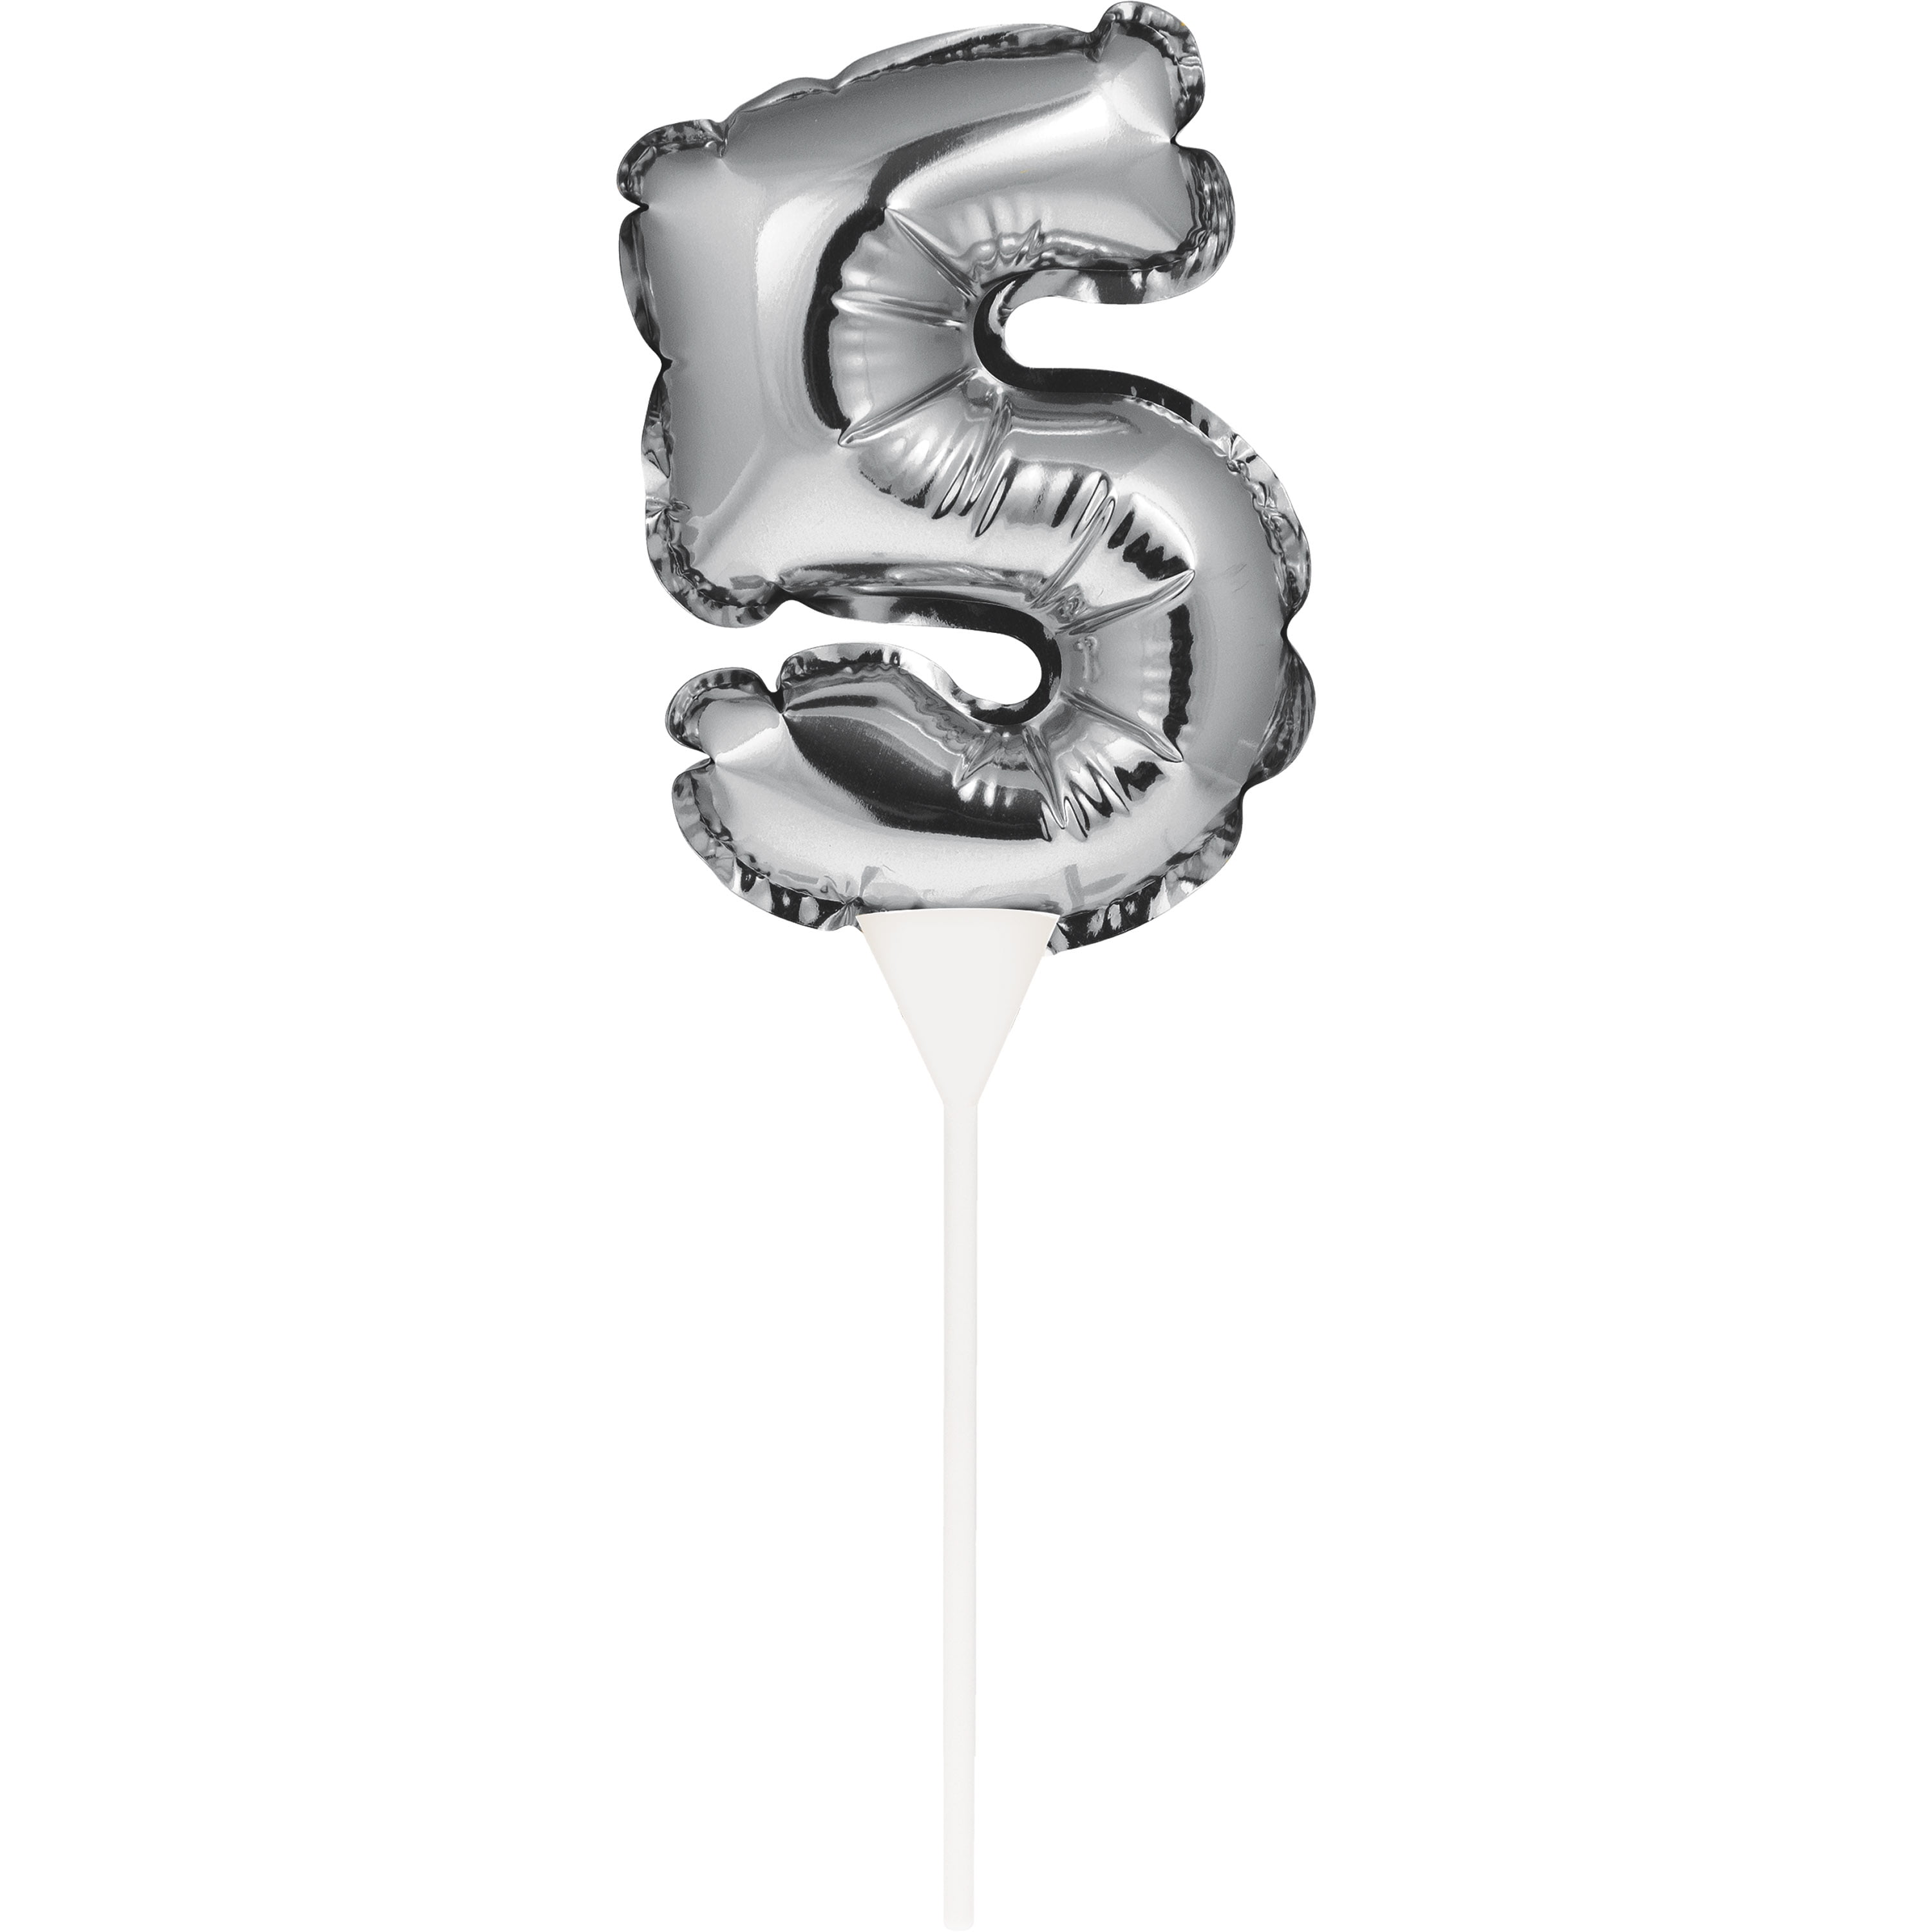 9" SILVER SELF-INFLATING BALLOON CAKE TOPPER 0 1 2 3 4 5 6 7 8 9 BIRTHDAY PARTY